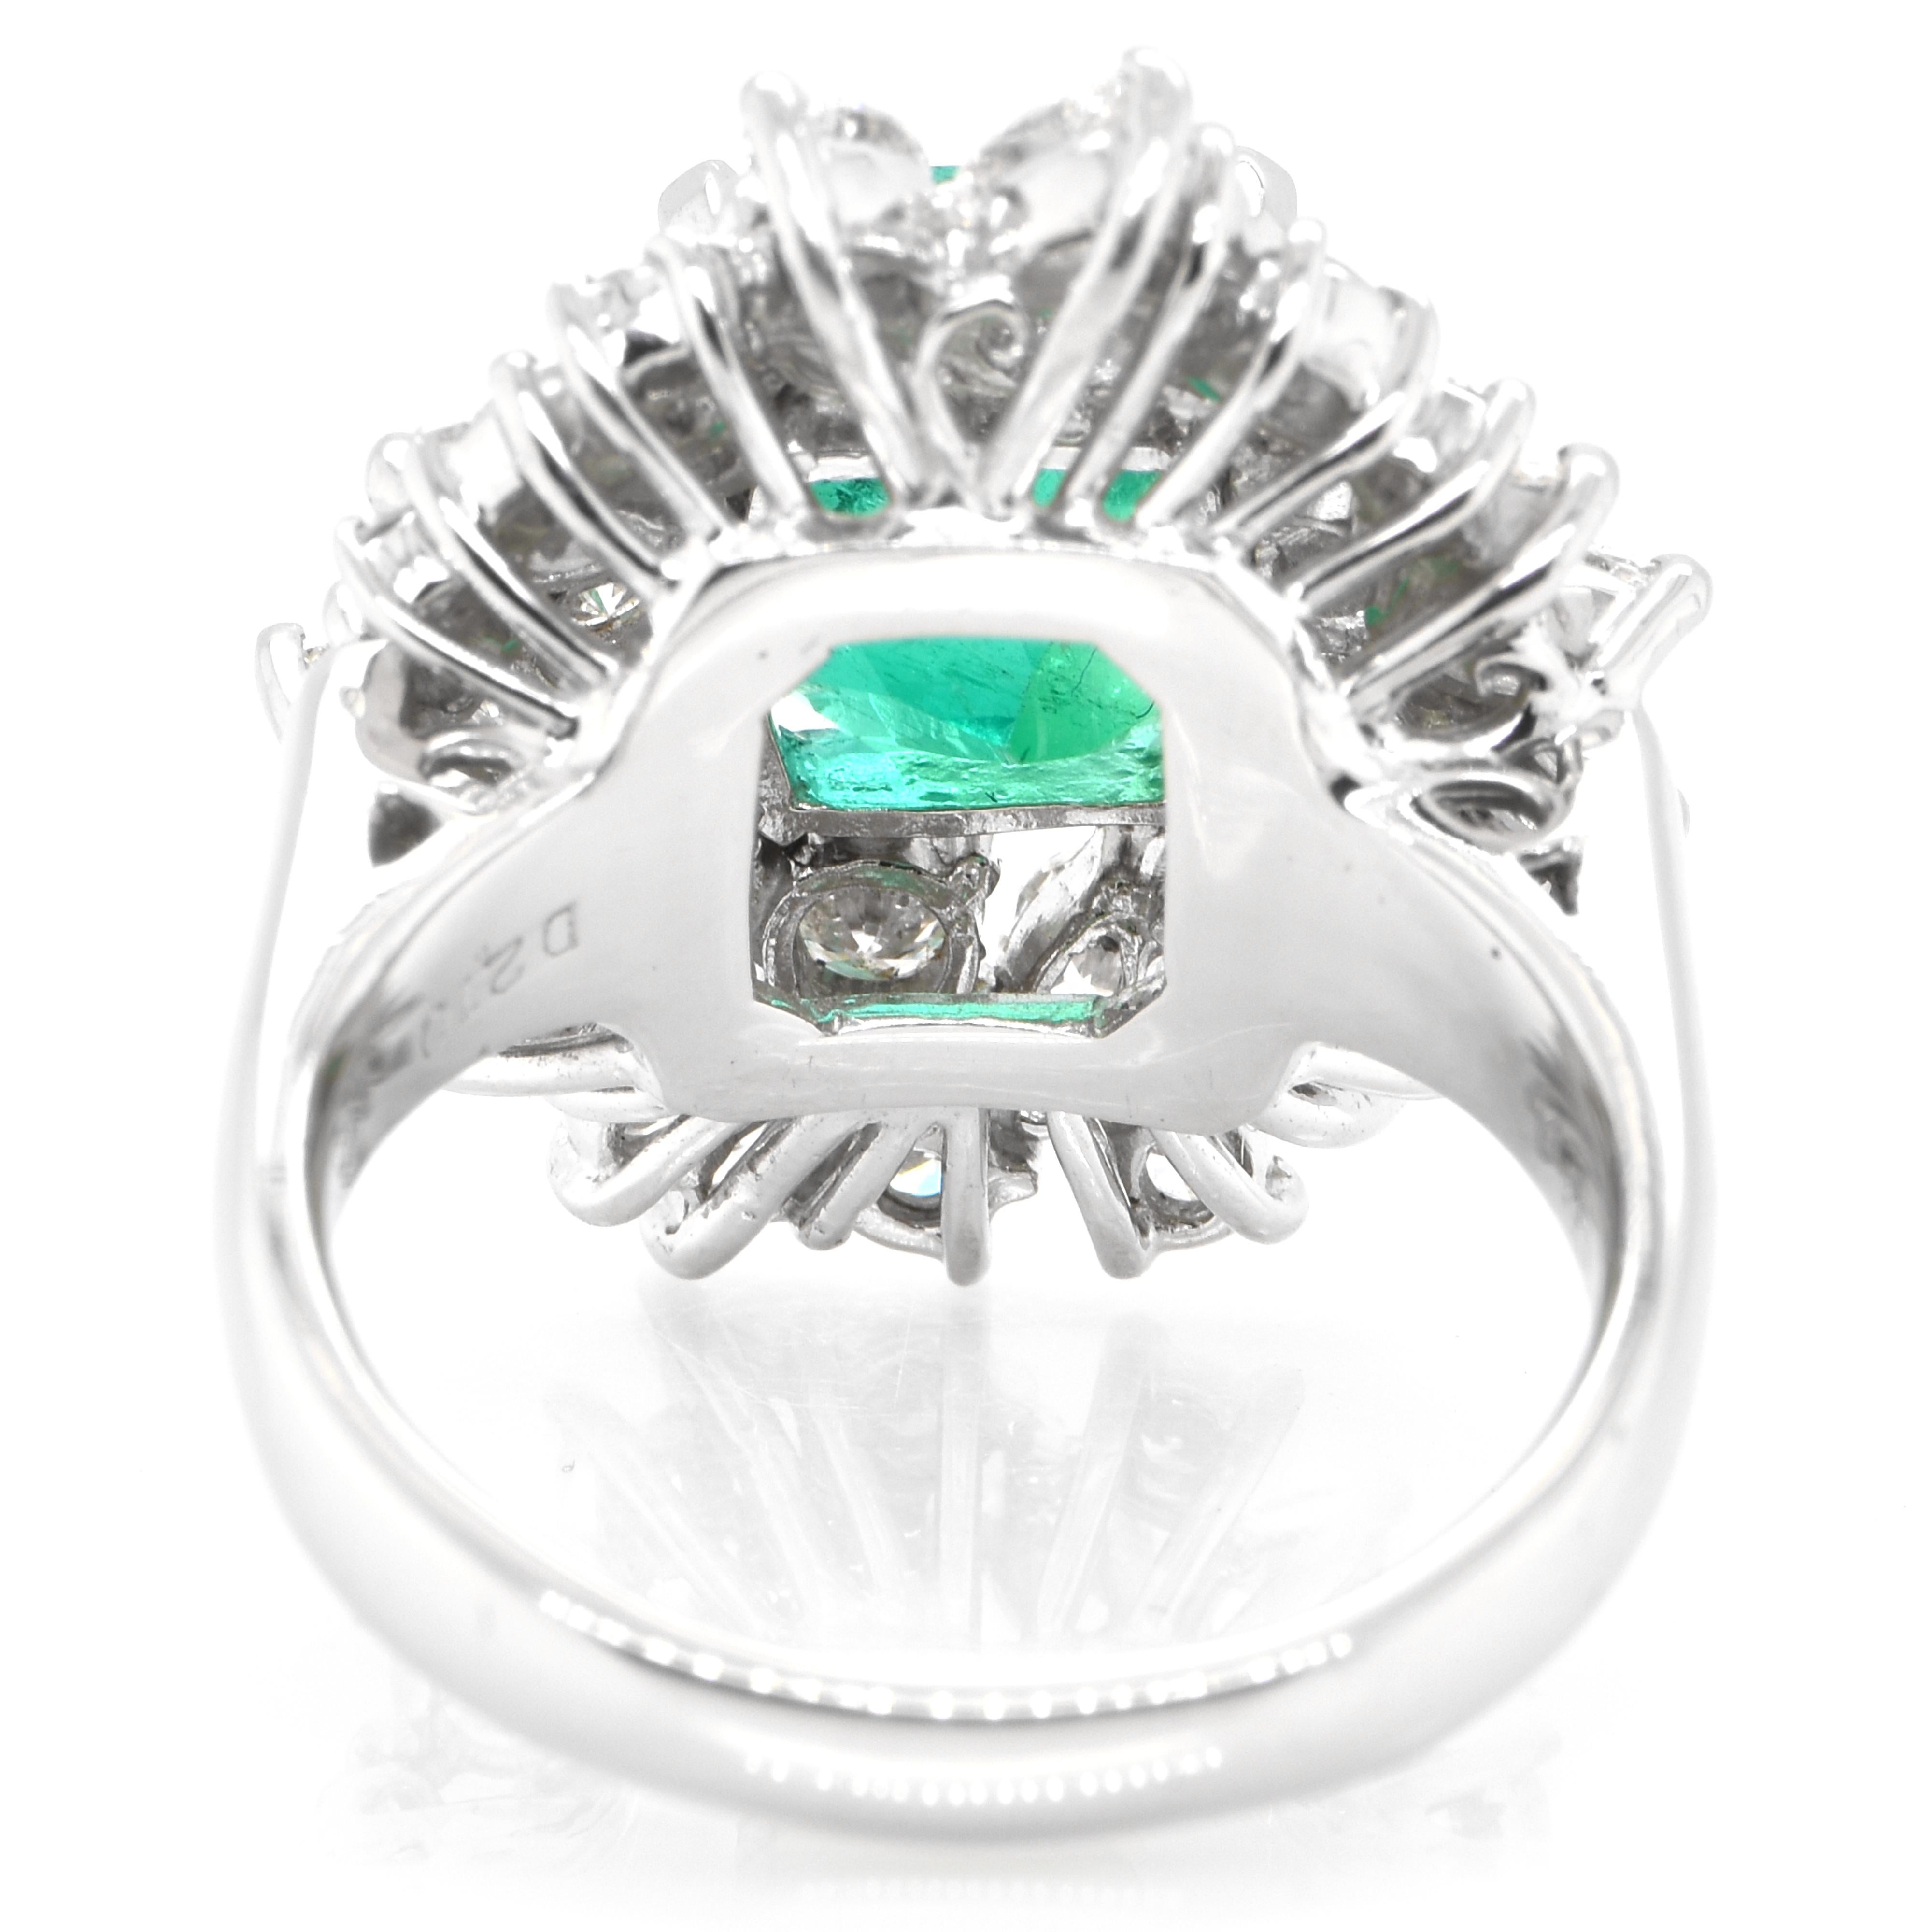 Women's 4.61 Carat Colombian, Muzo Color Emerald & Diamond Cocktail Ring Set in Platinum For Sale